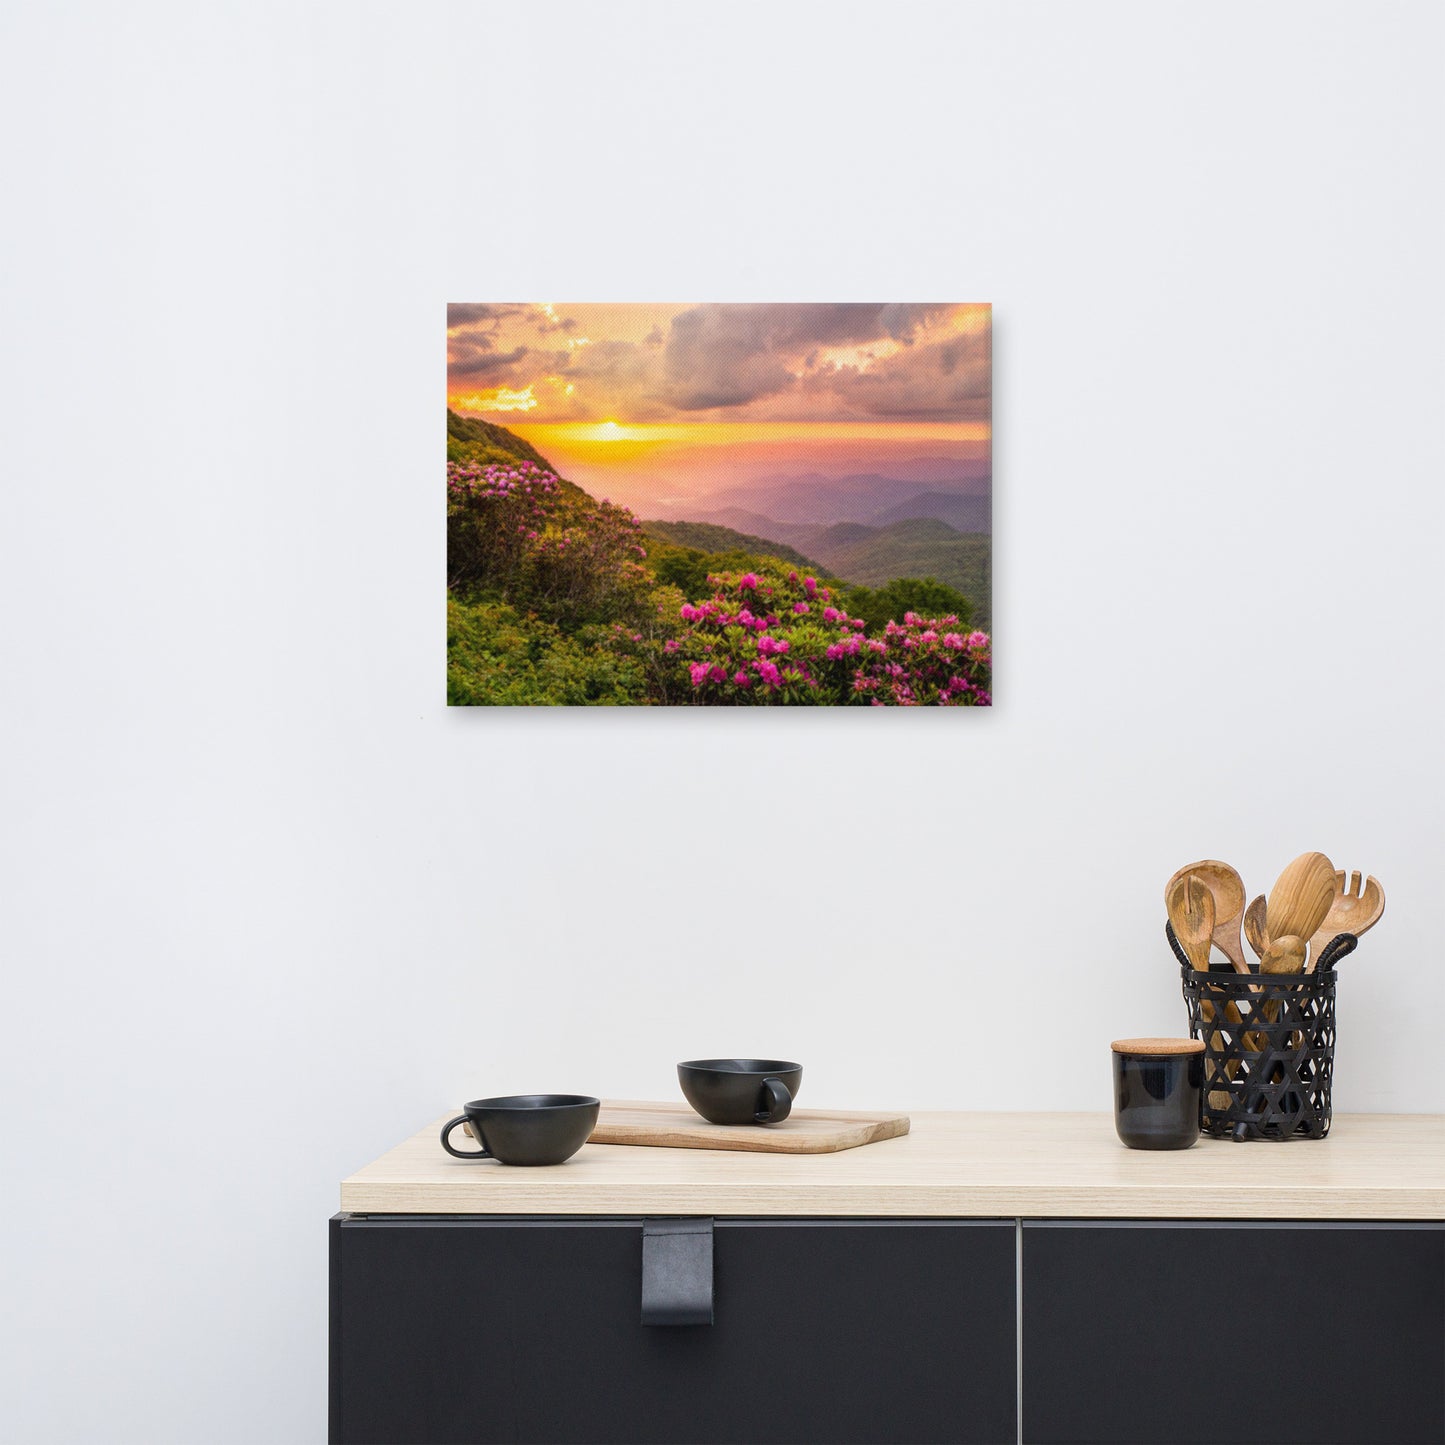 Master Bedroom Wall Decor Above Bed: Close of the Day - Appalachian Mountains Sunset - Floral / Botanical / Rustic Landscape Photograph Asheville North Carolina Blue Ridge Parkway